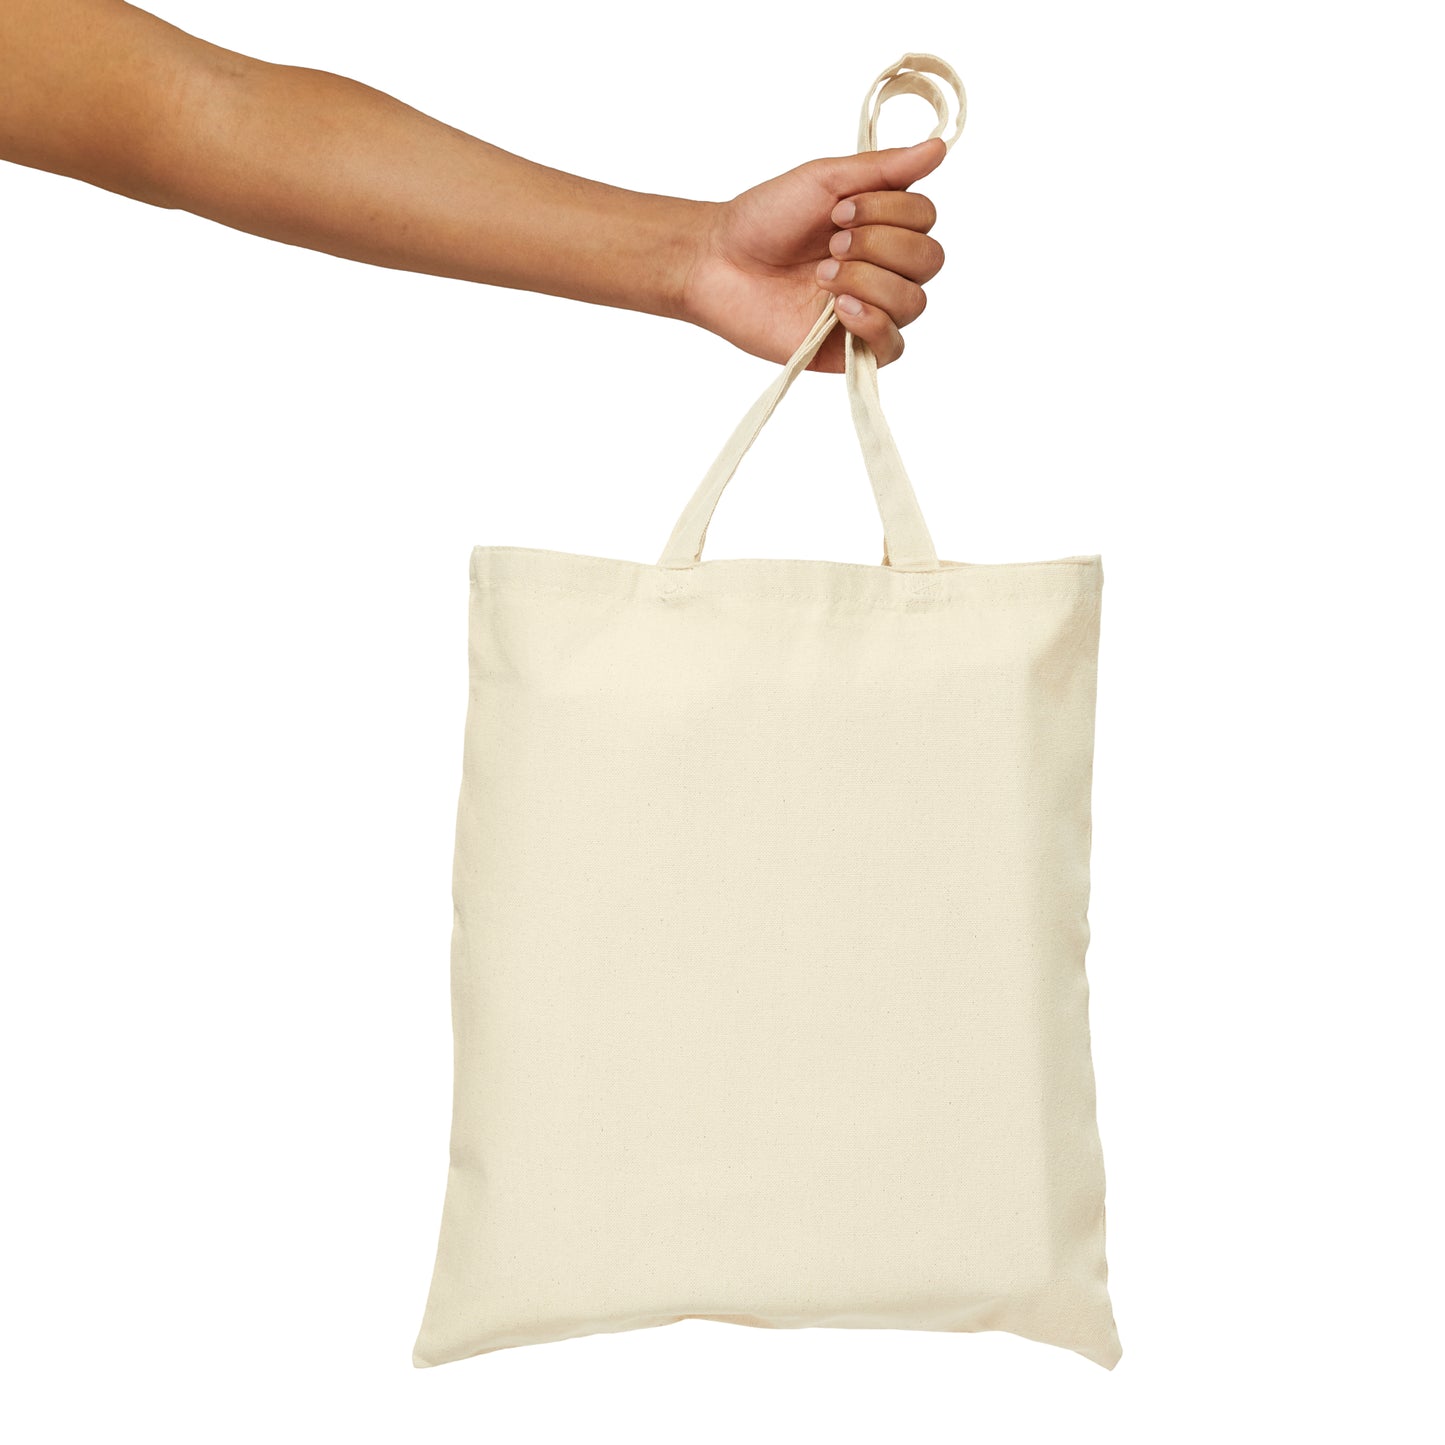 "Eye" Cotton Canvas Tote Bag - Forest